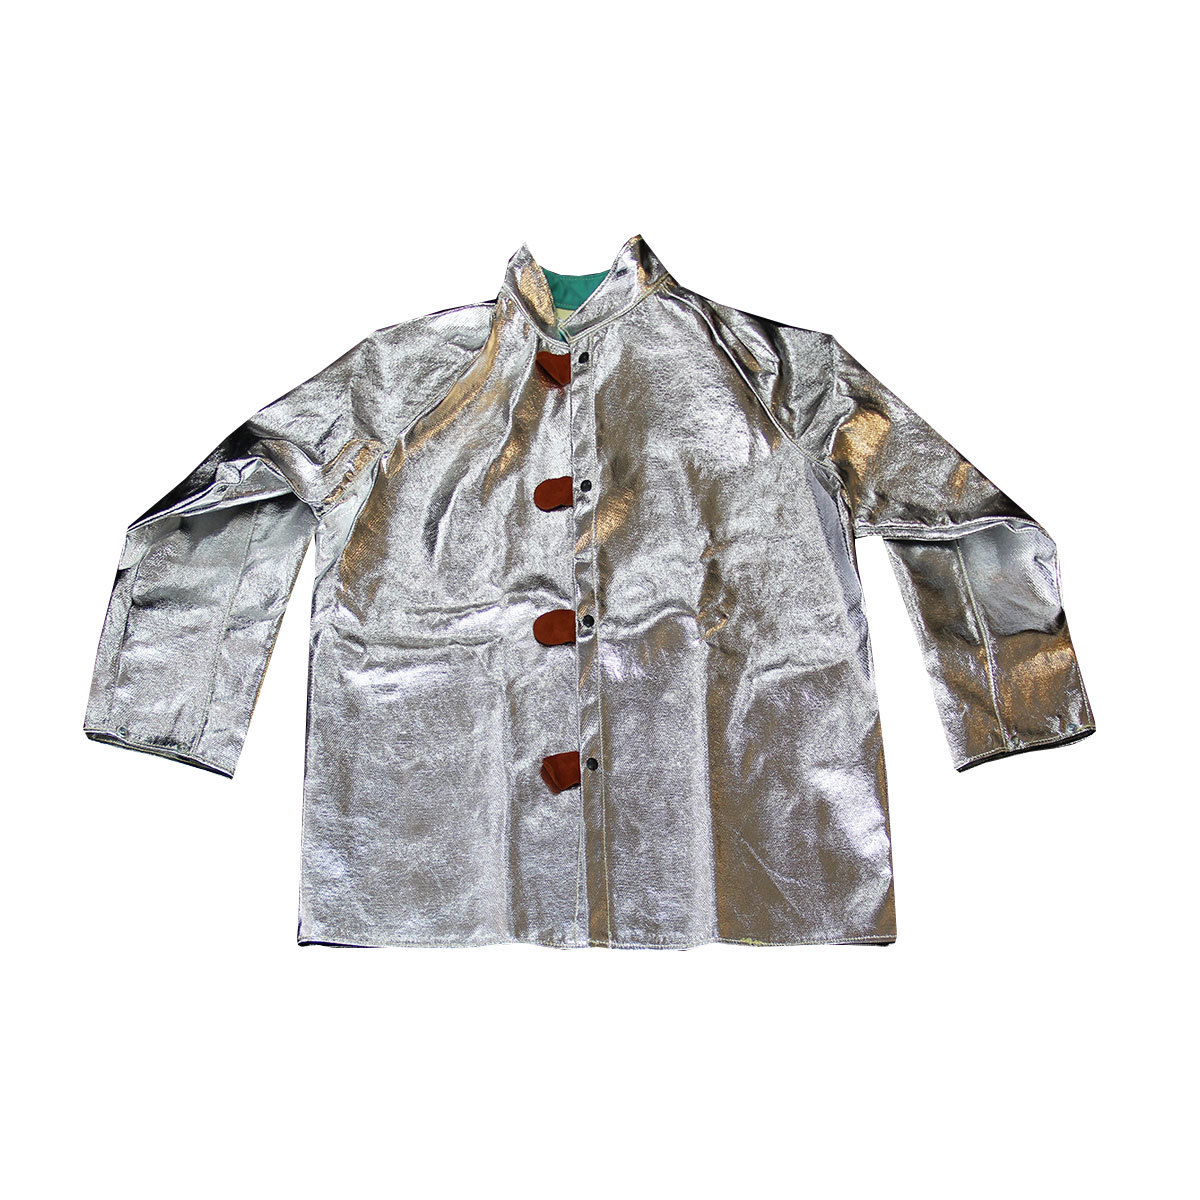 Chicago Protective Apparel X-Large Silver Aluminized Para-Aramid Blend Heat Resistant Jacket